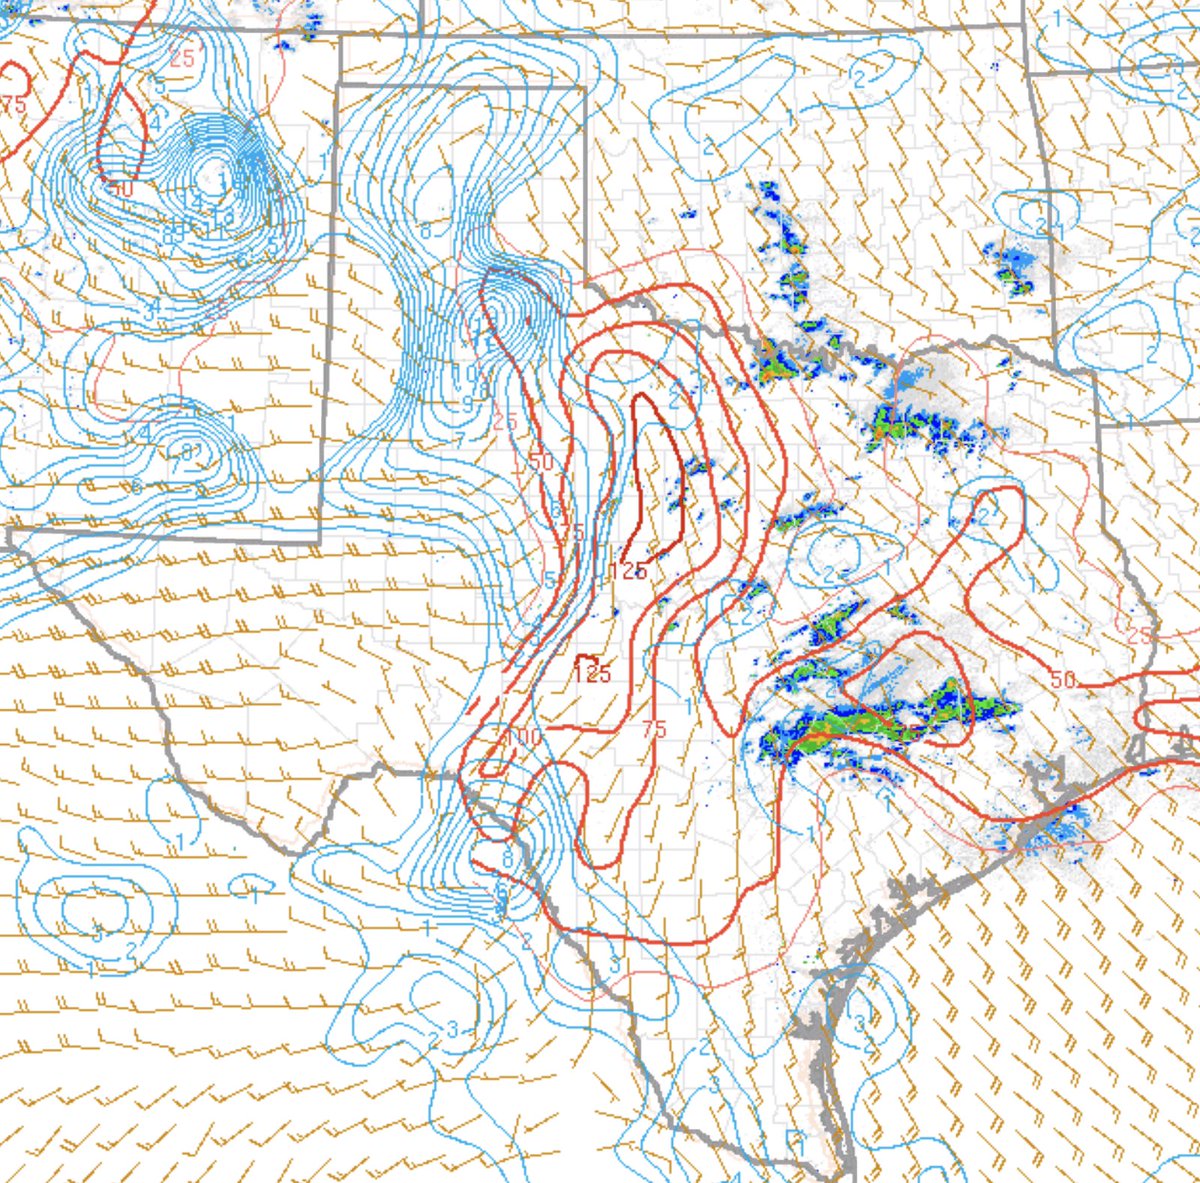 Up just south of the Red River today looking for a little fun this afternoon. Full on chimichanga and Funyuns and ready for go time.  #txwx  #okwx